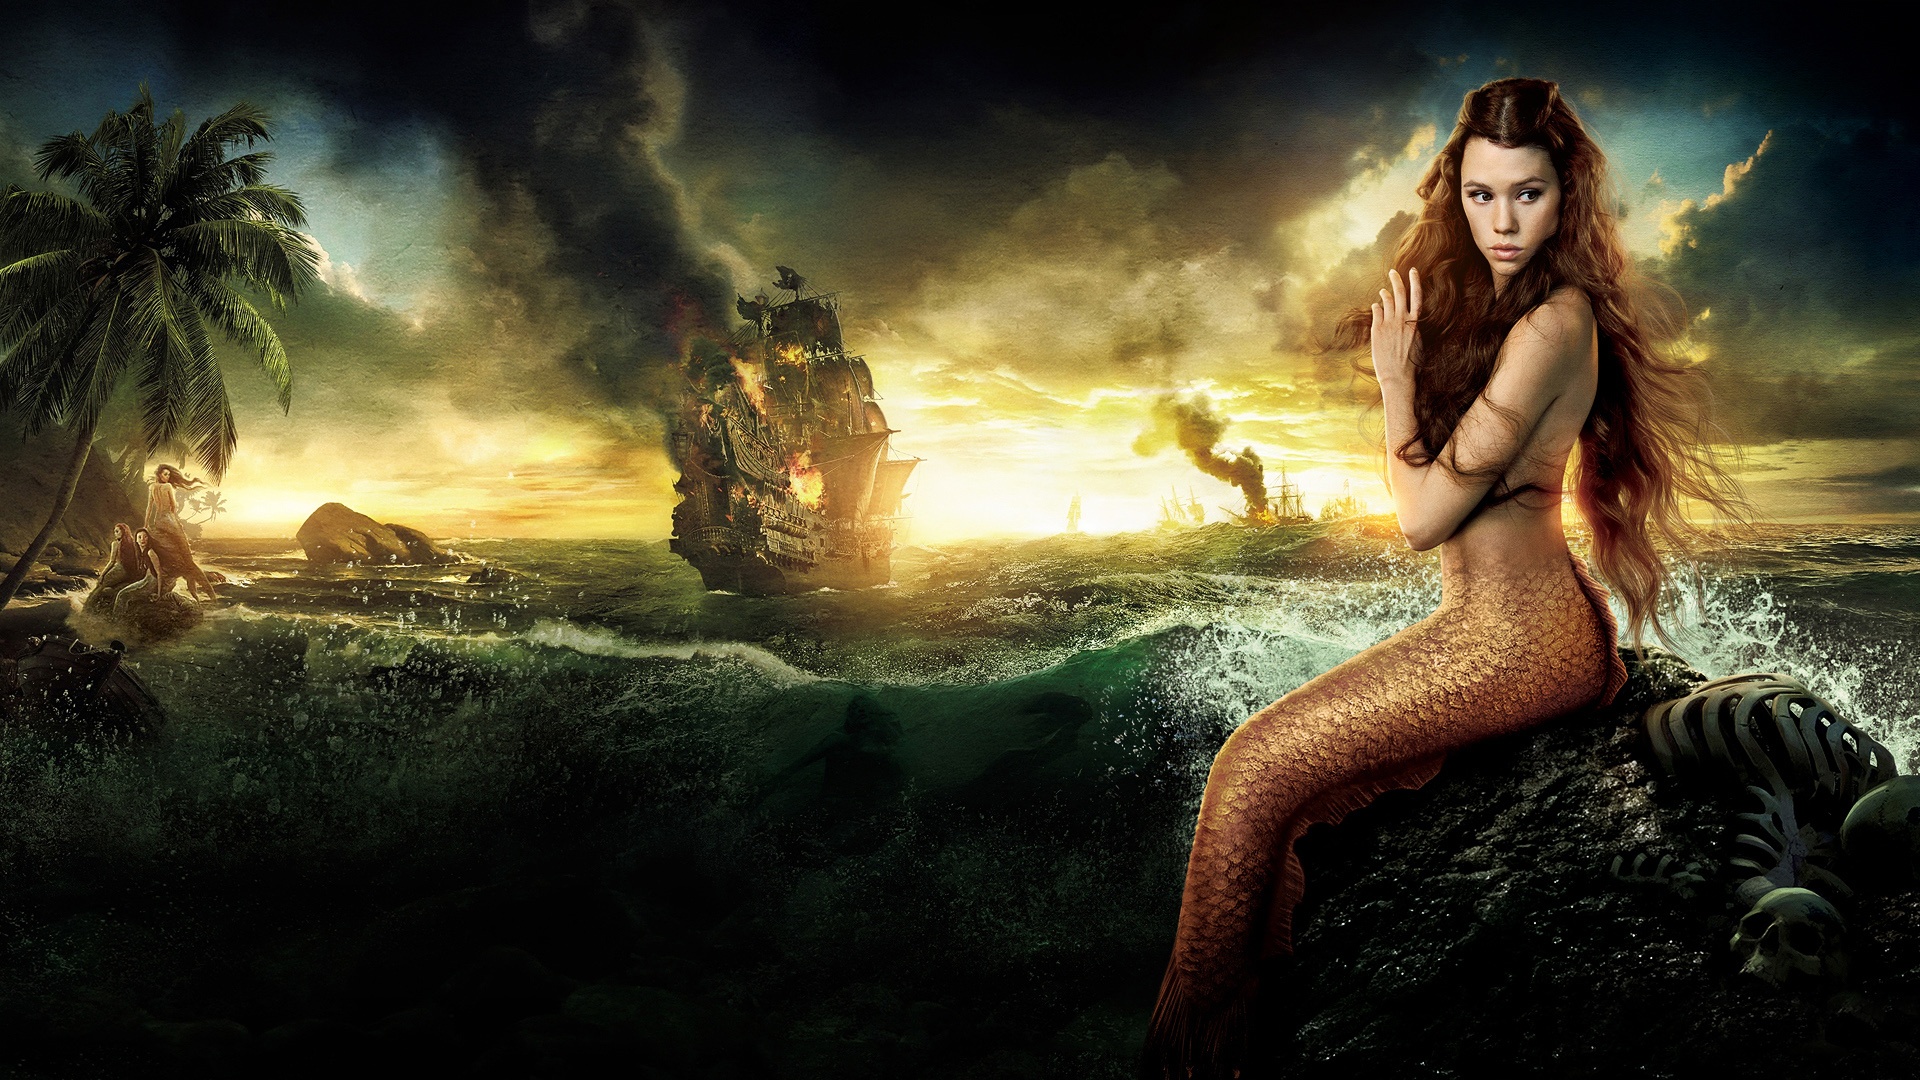  Pirates of the Caribbean On Stranger Tides Wallpapers HD Wallpapers